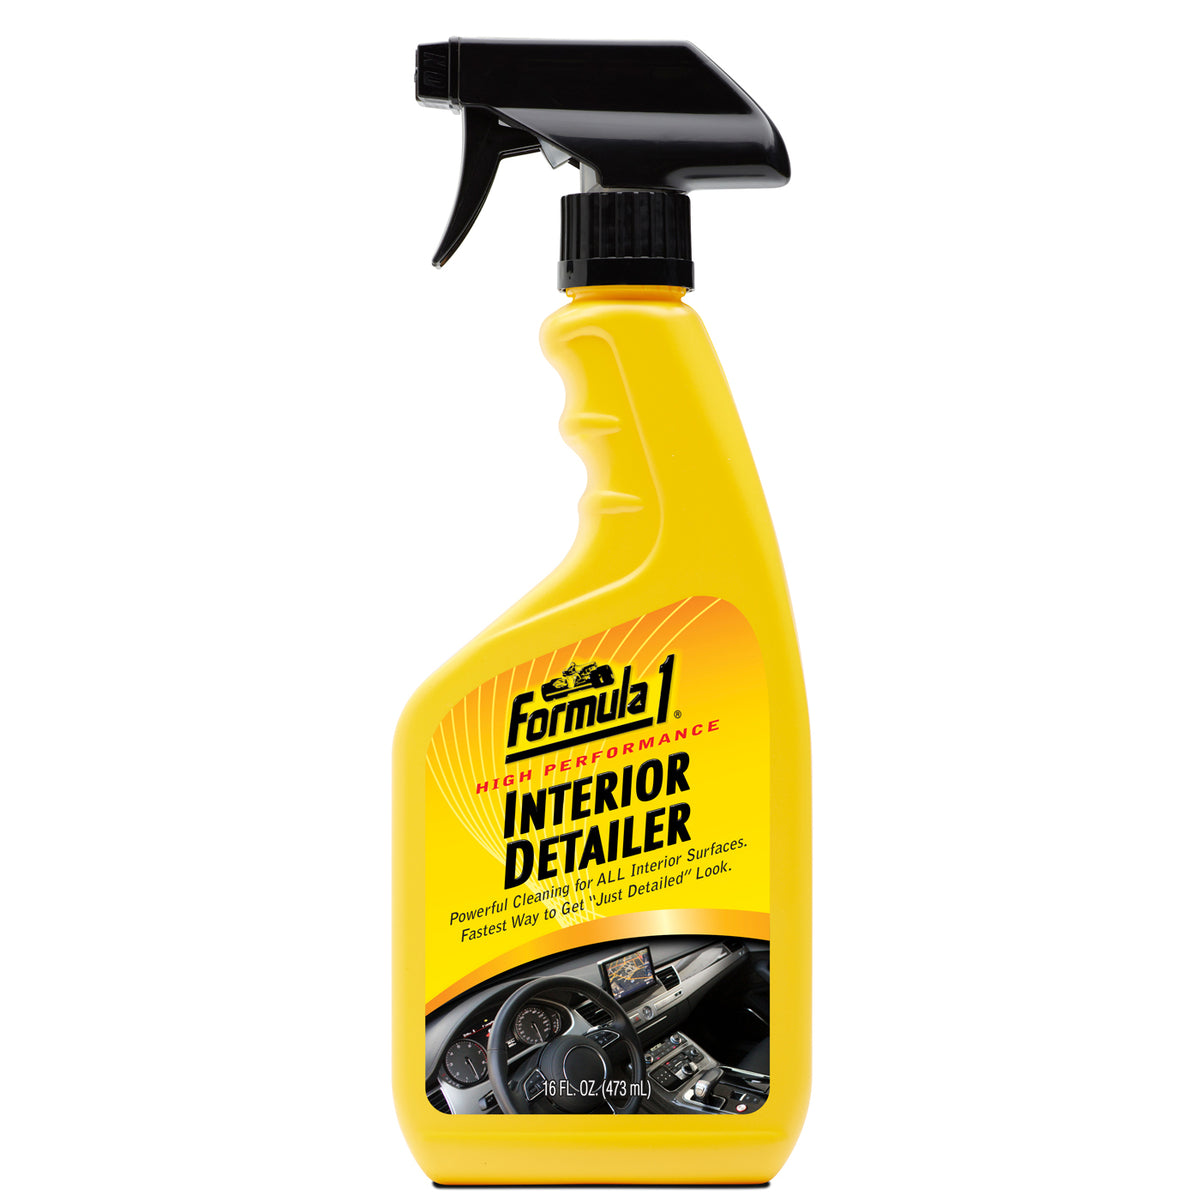 Total Interior Cleaner & Protectant Car Cleaning Wipes